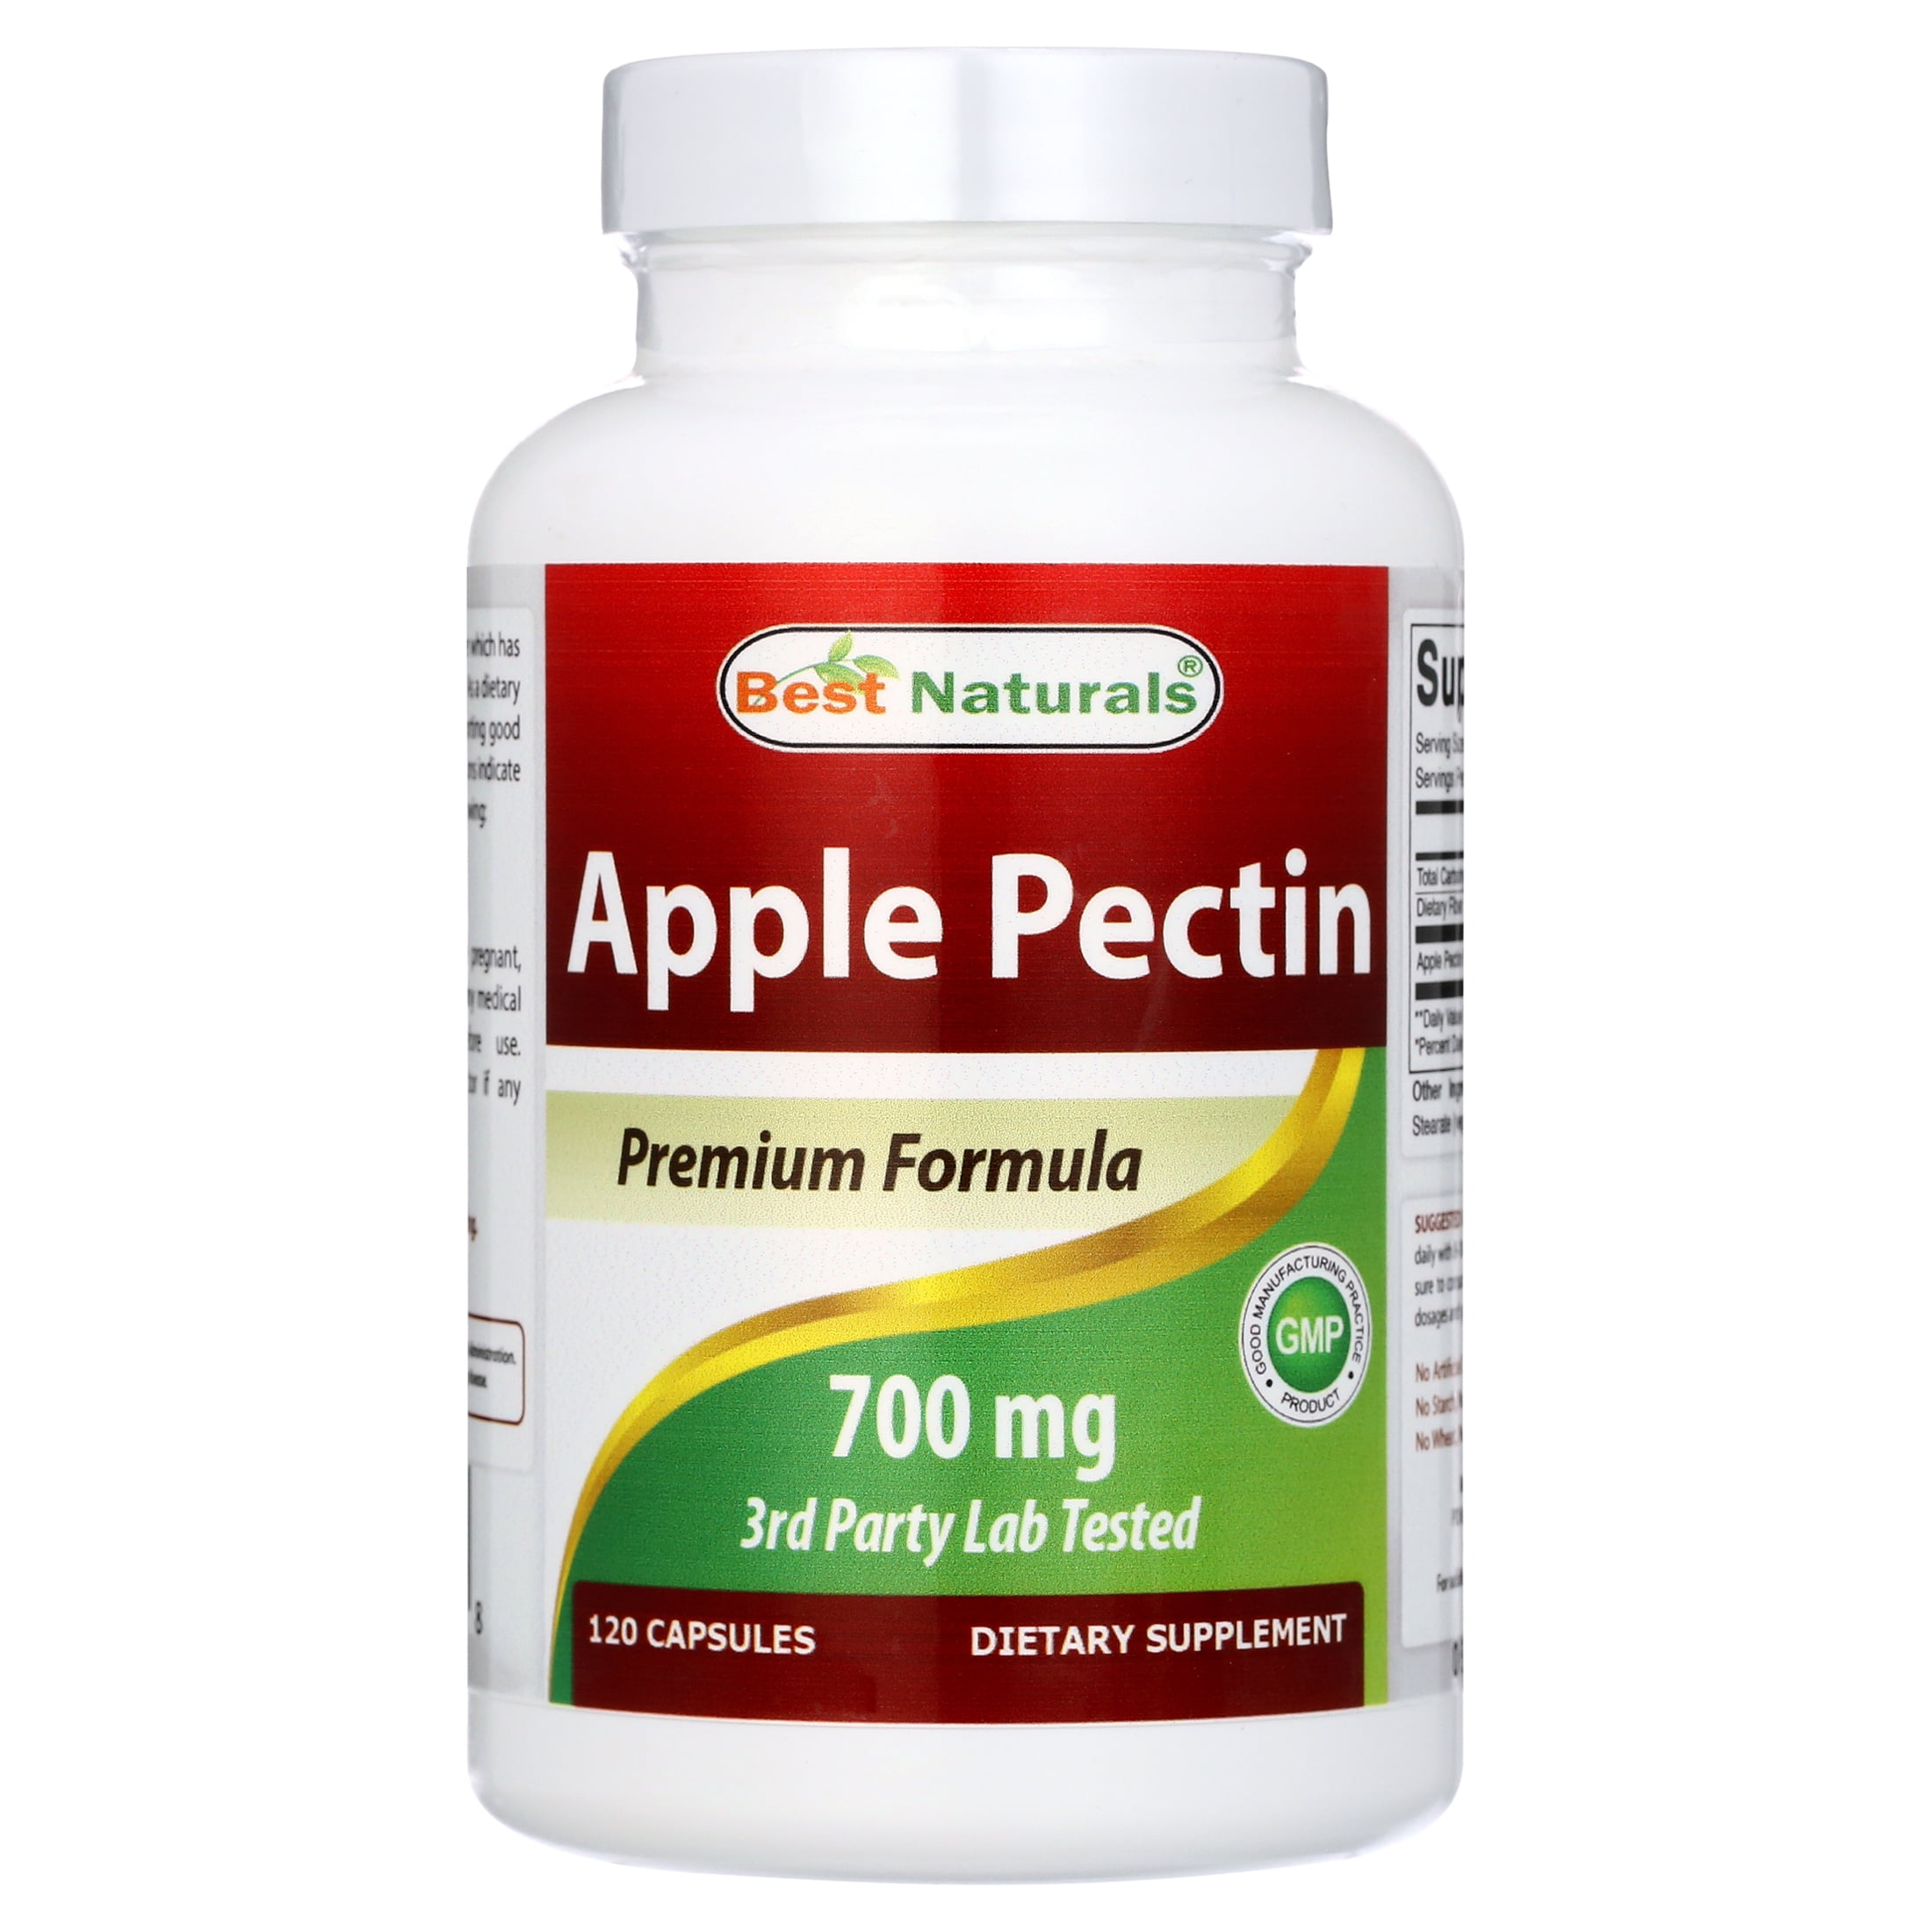 Buy Pecvit Products Online at Best Prices in India